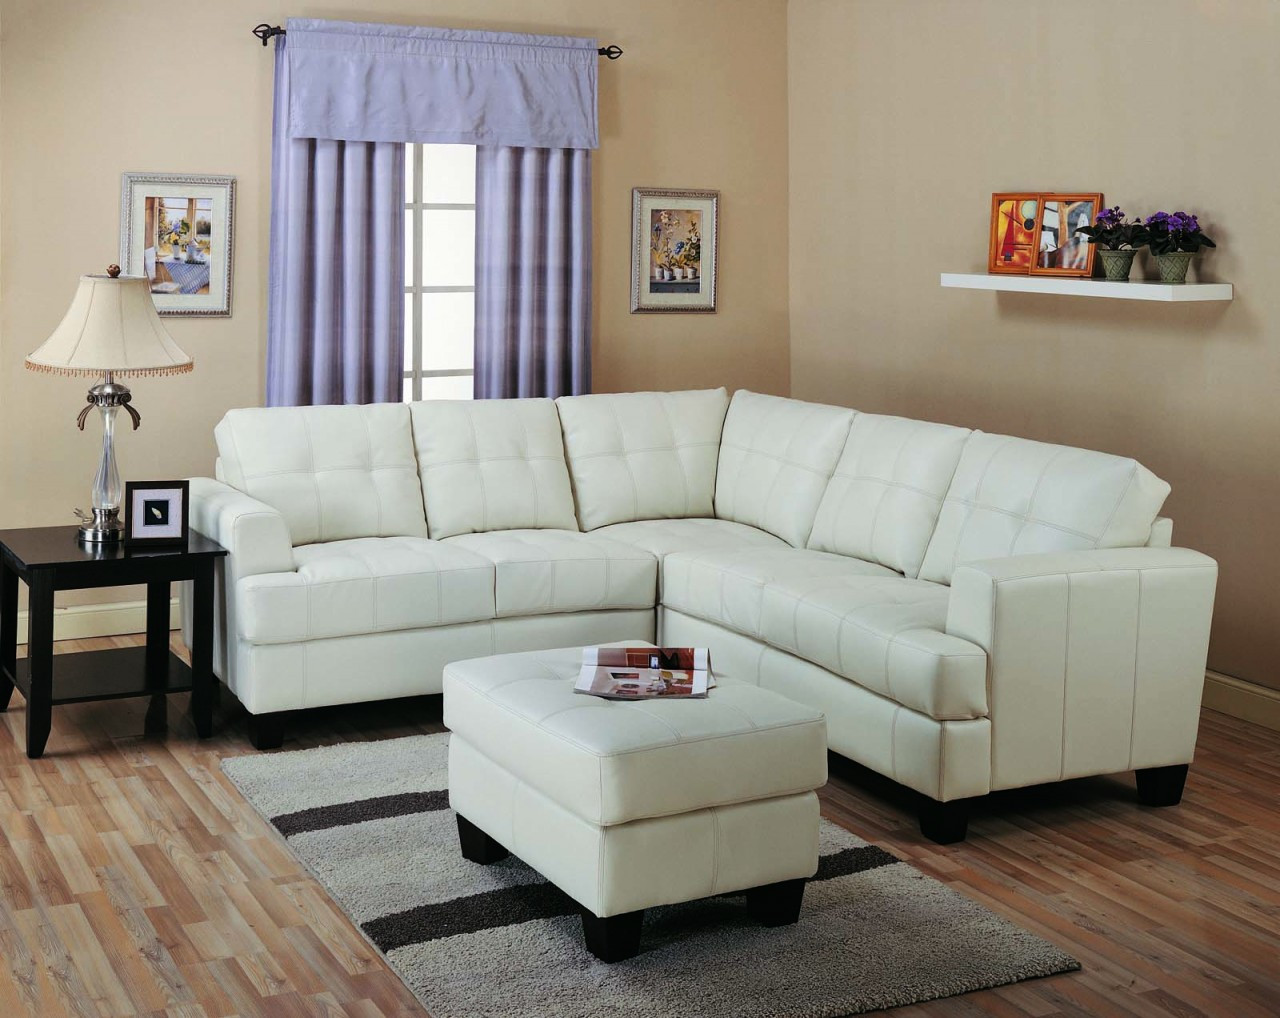 Small Living Room Couch
 Types of Best Small Sectional Couches for Small Living